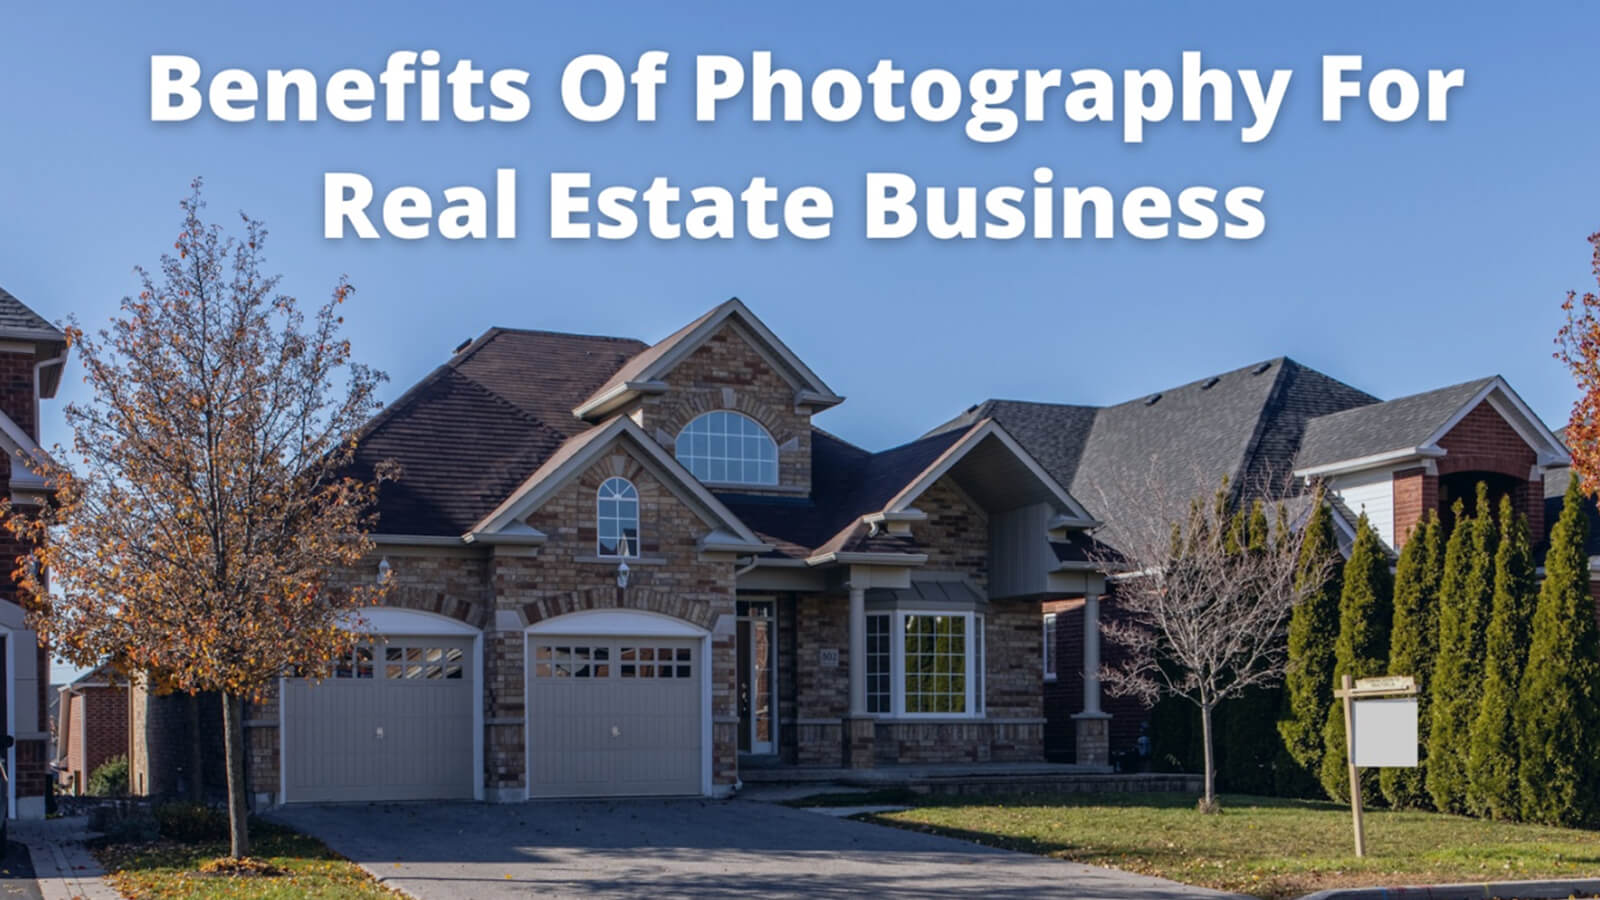 Benefits of Professional Real Estate Photography